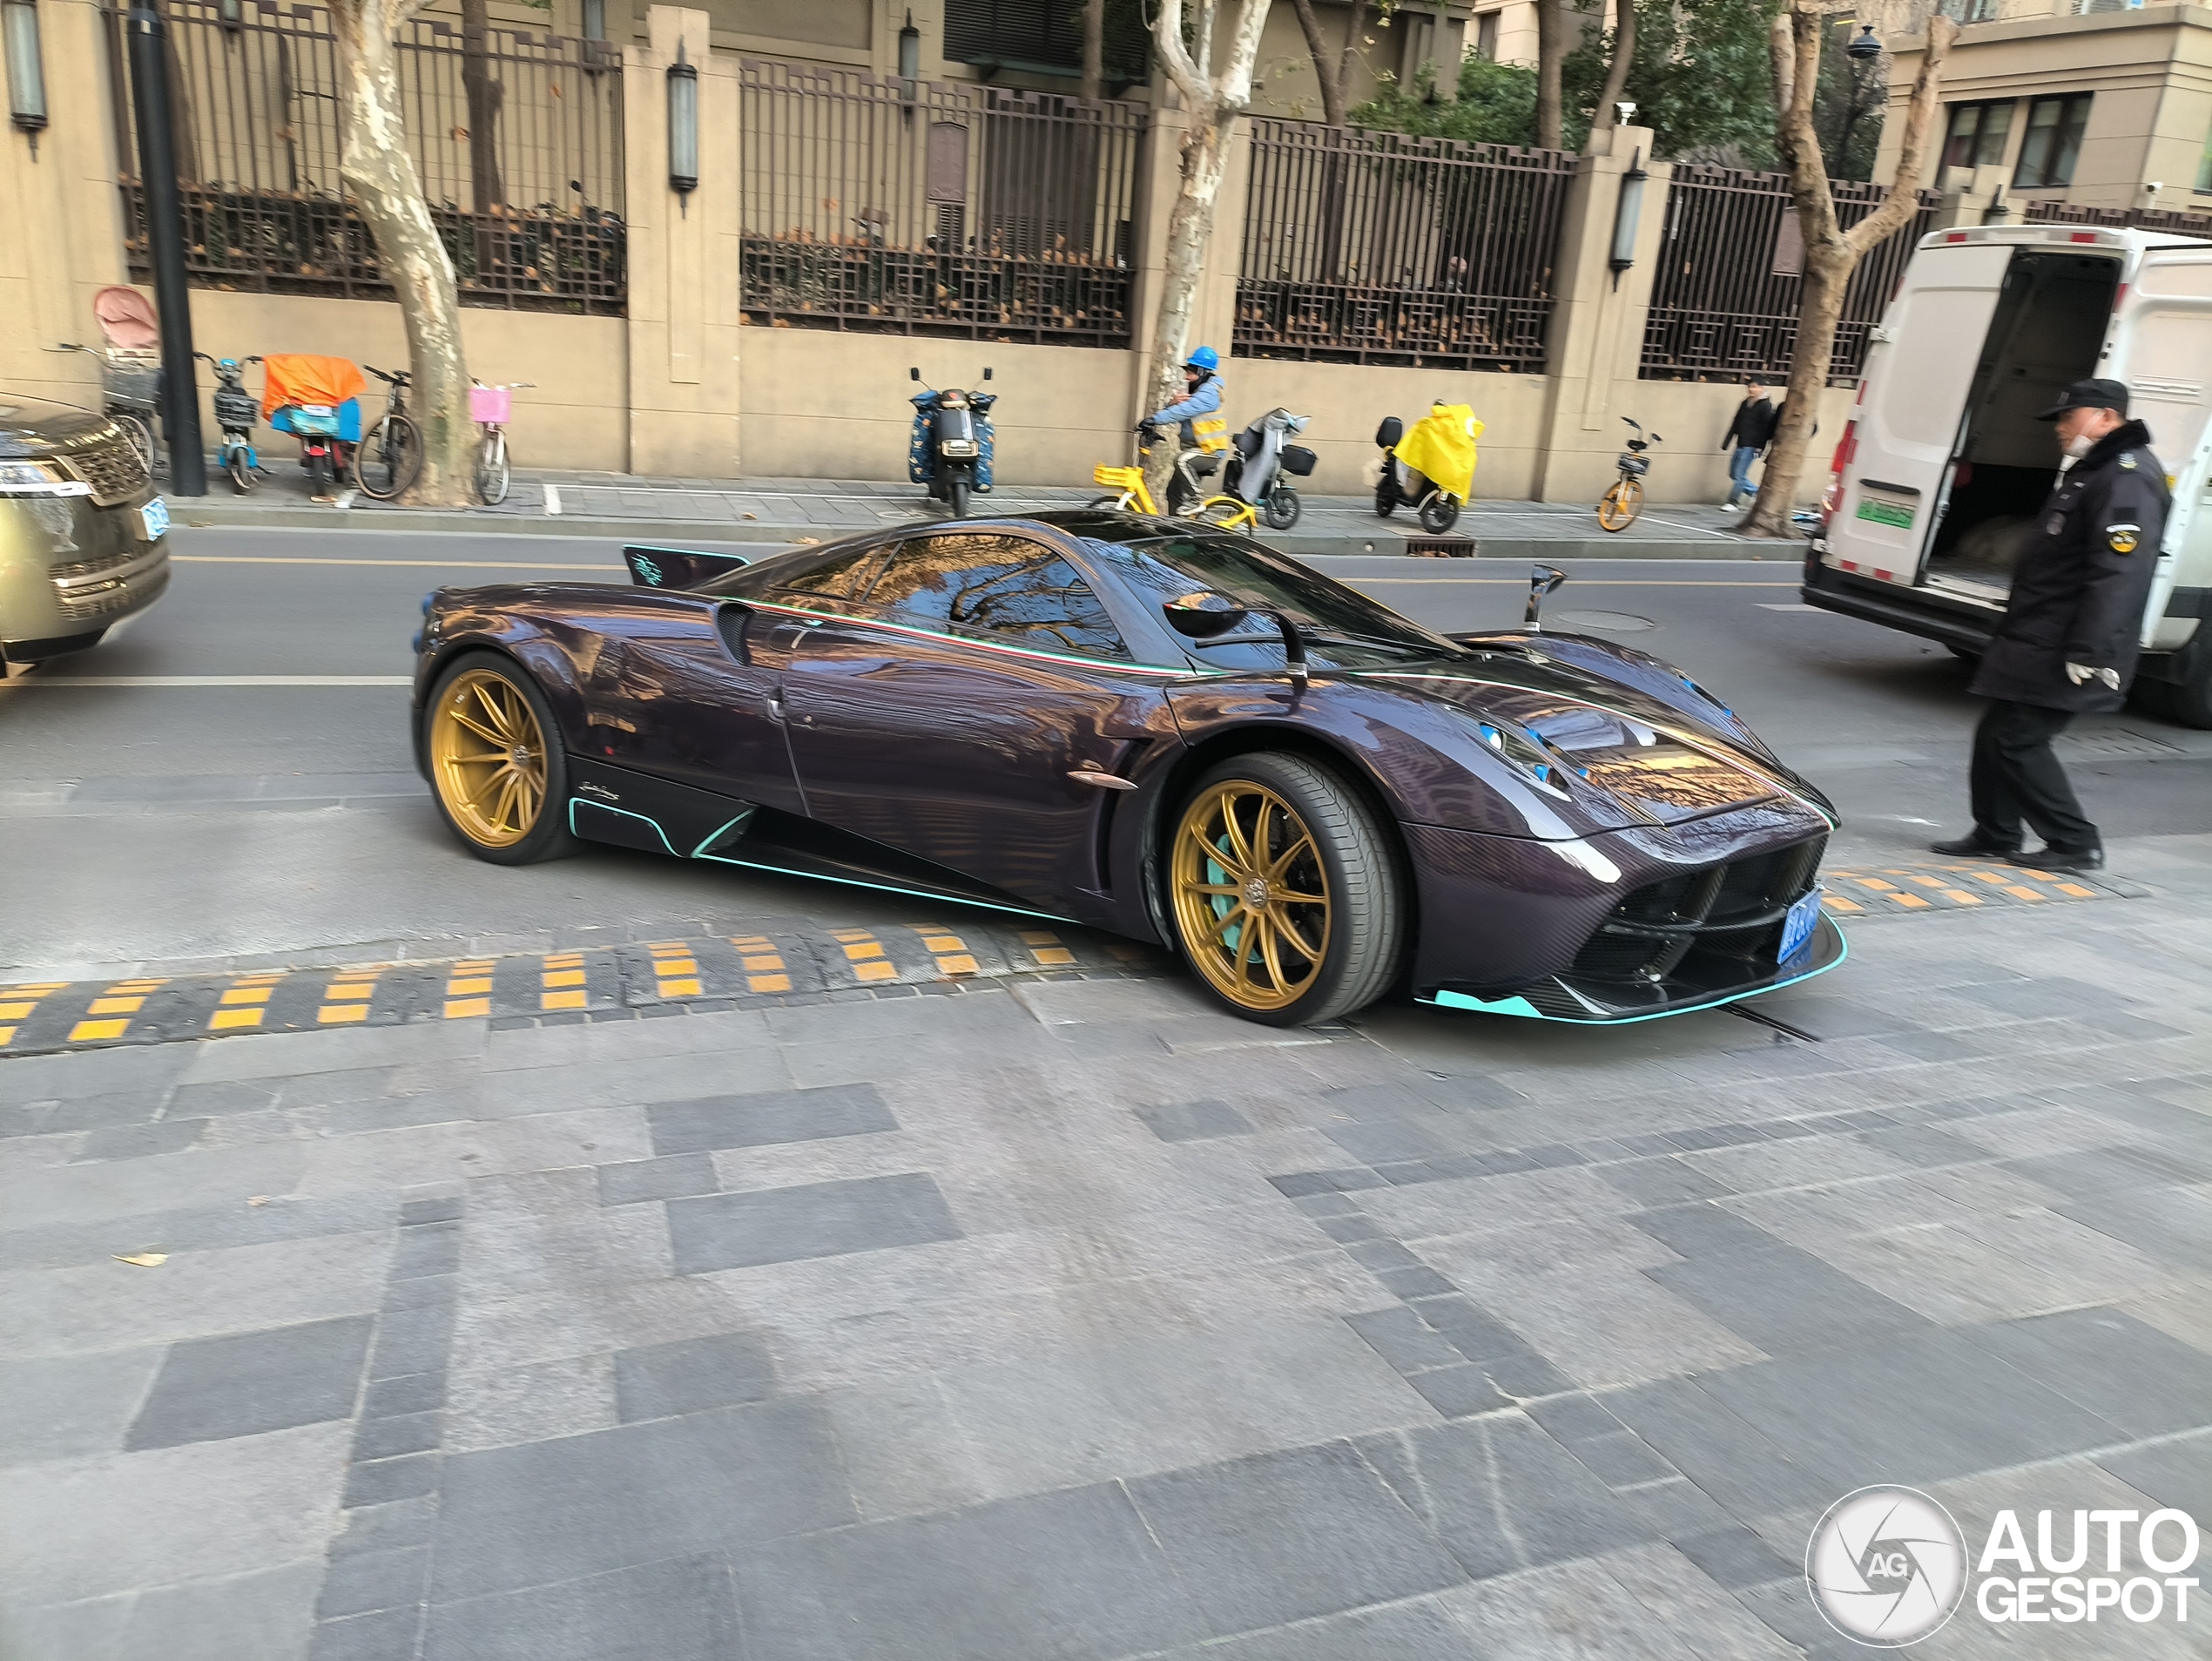 After many years, the Huayra Dinastia finally reappears!